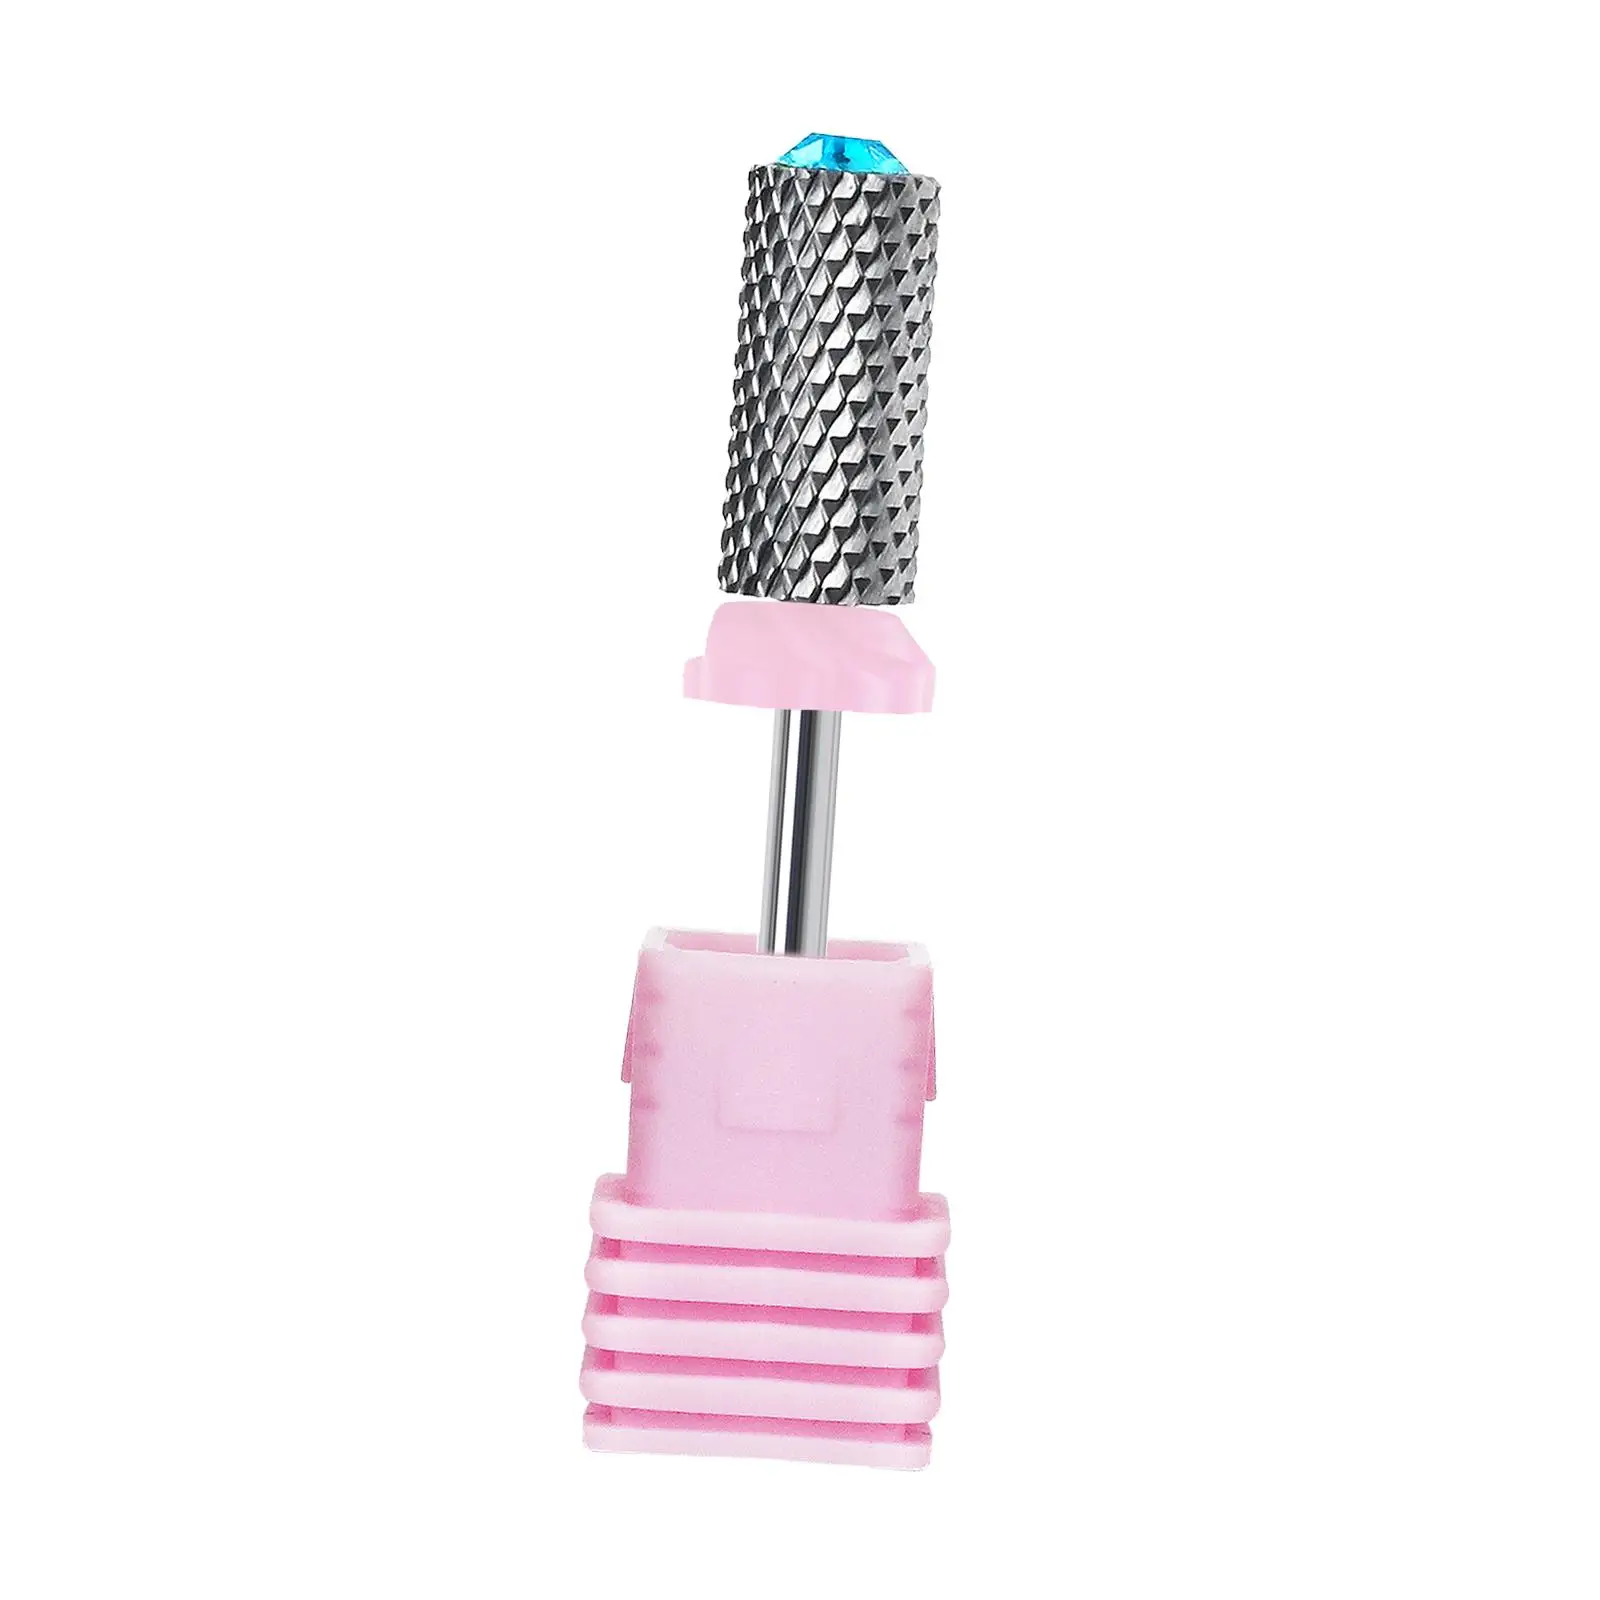 Nail Drill Bit Rotary Burrs Cuticle Remover Bit for Manicure Tool Salon Use